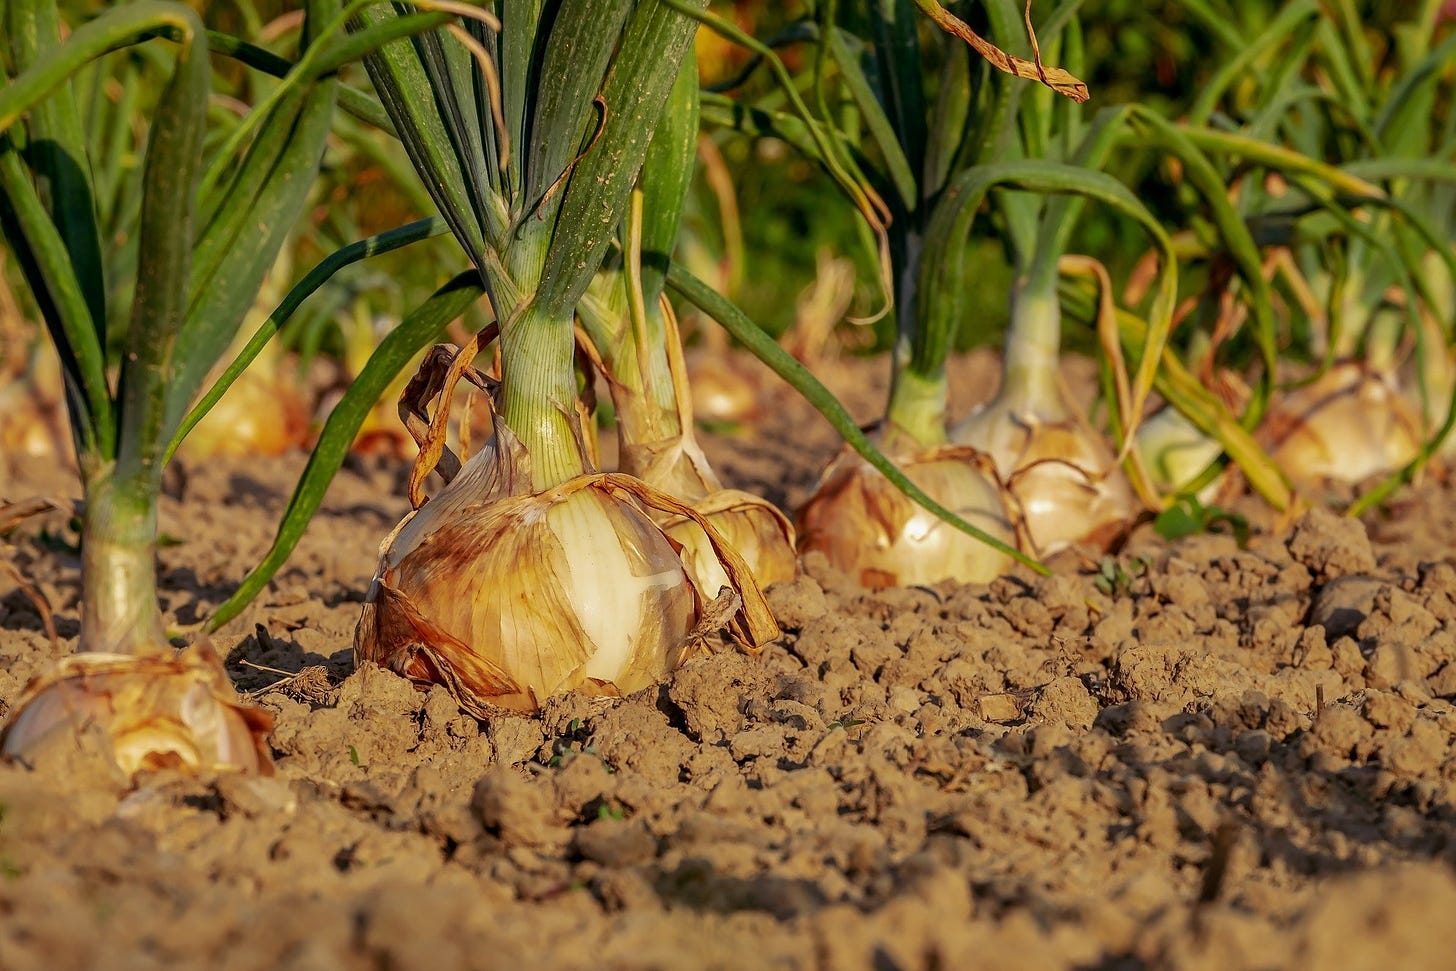 Onions with brown bulbs and green stems growing out of brown soil. 